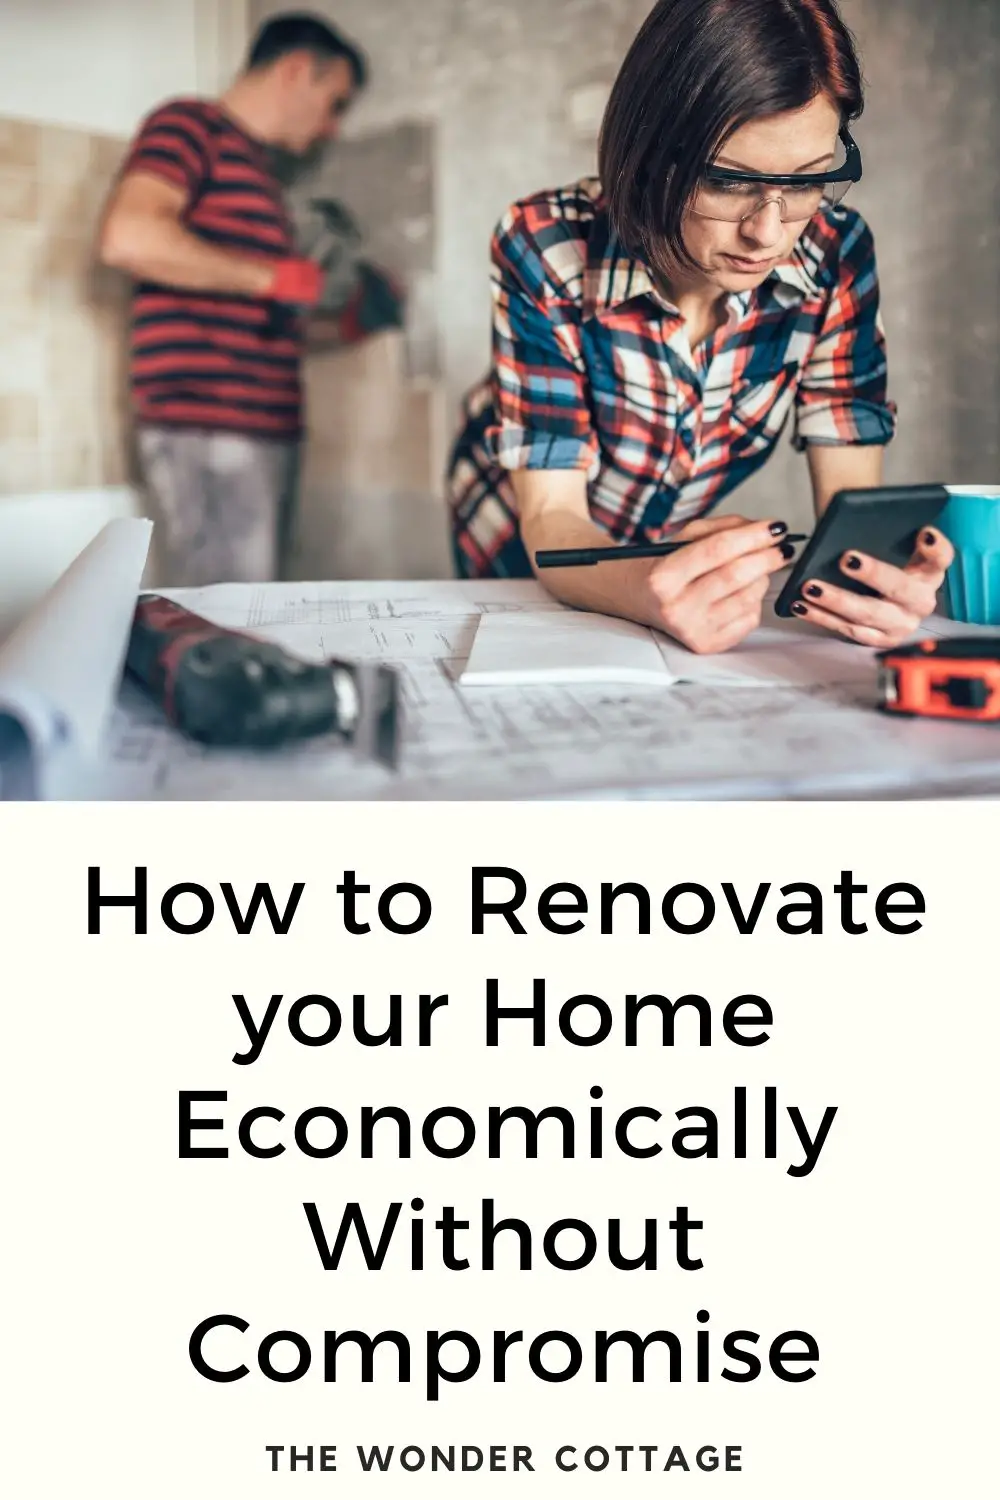 how to renovate economically without compromise